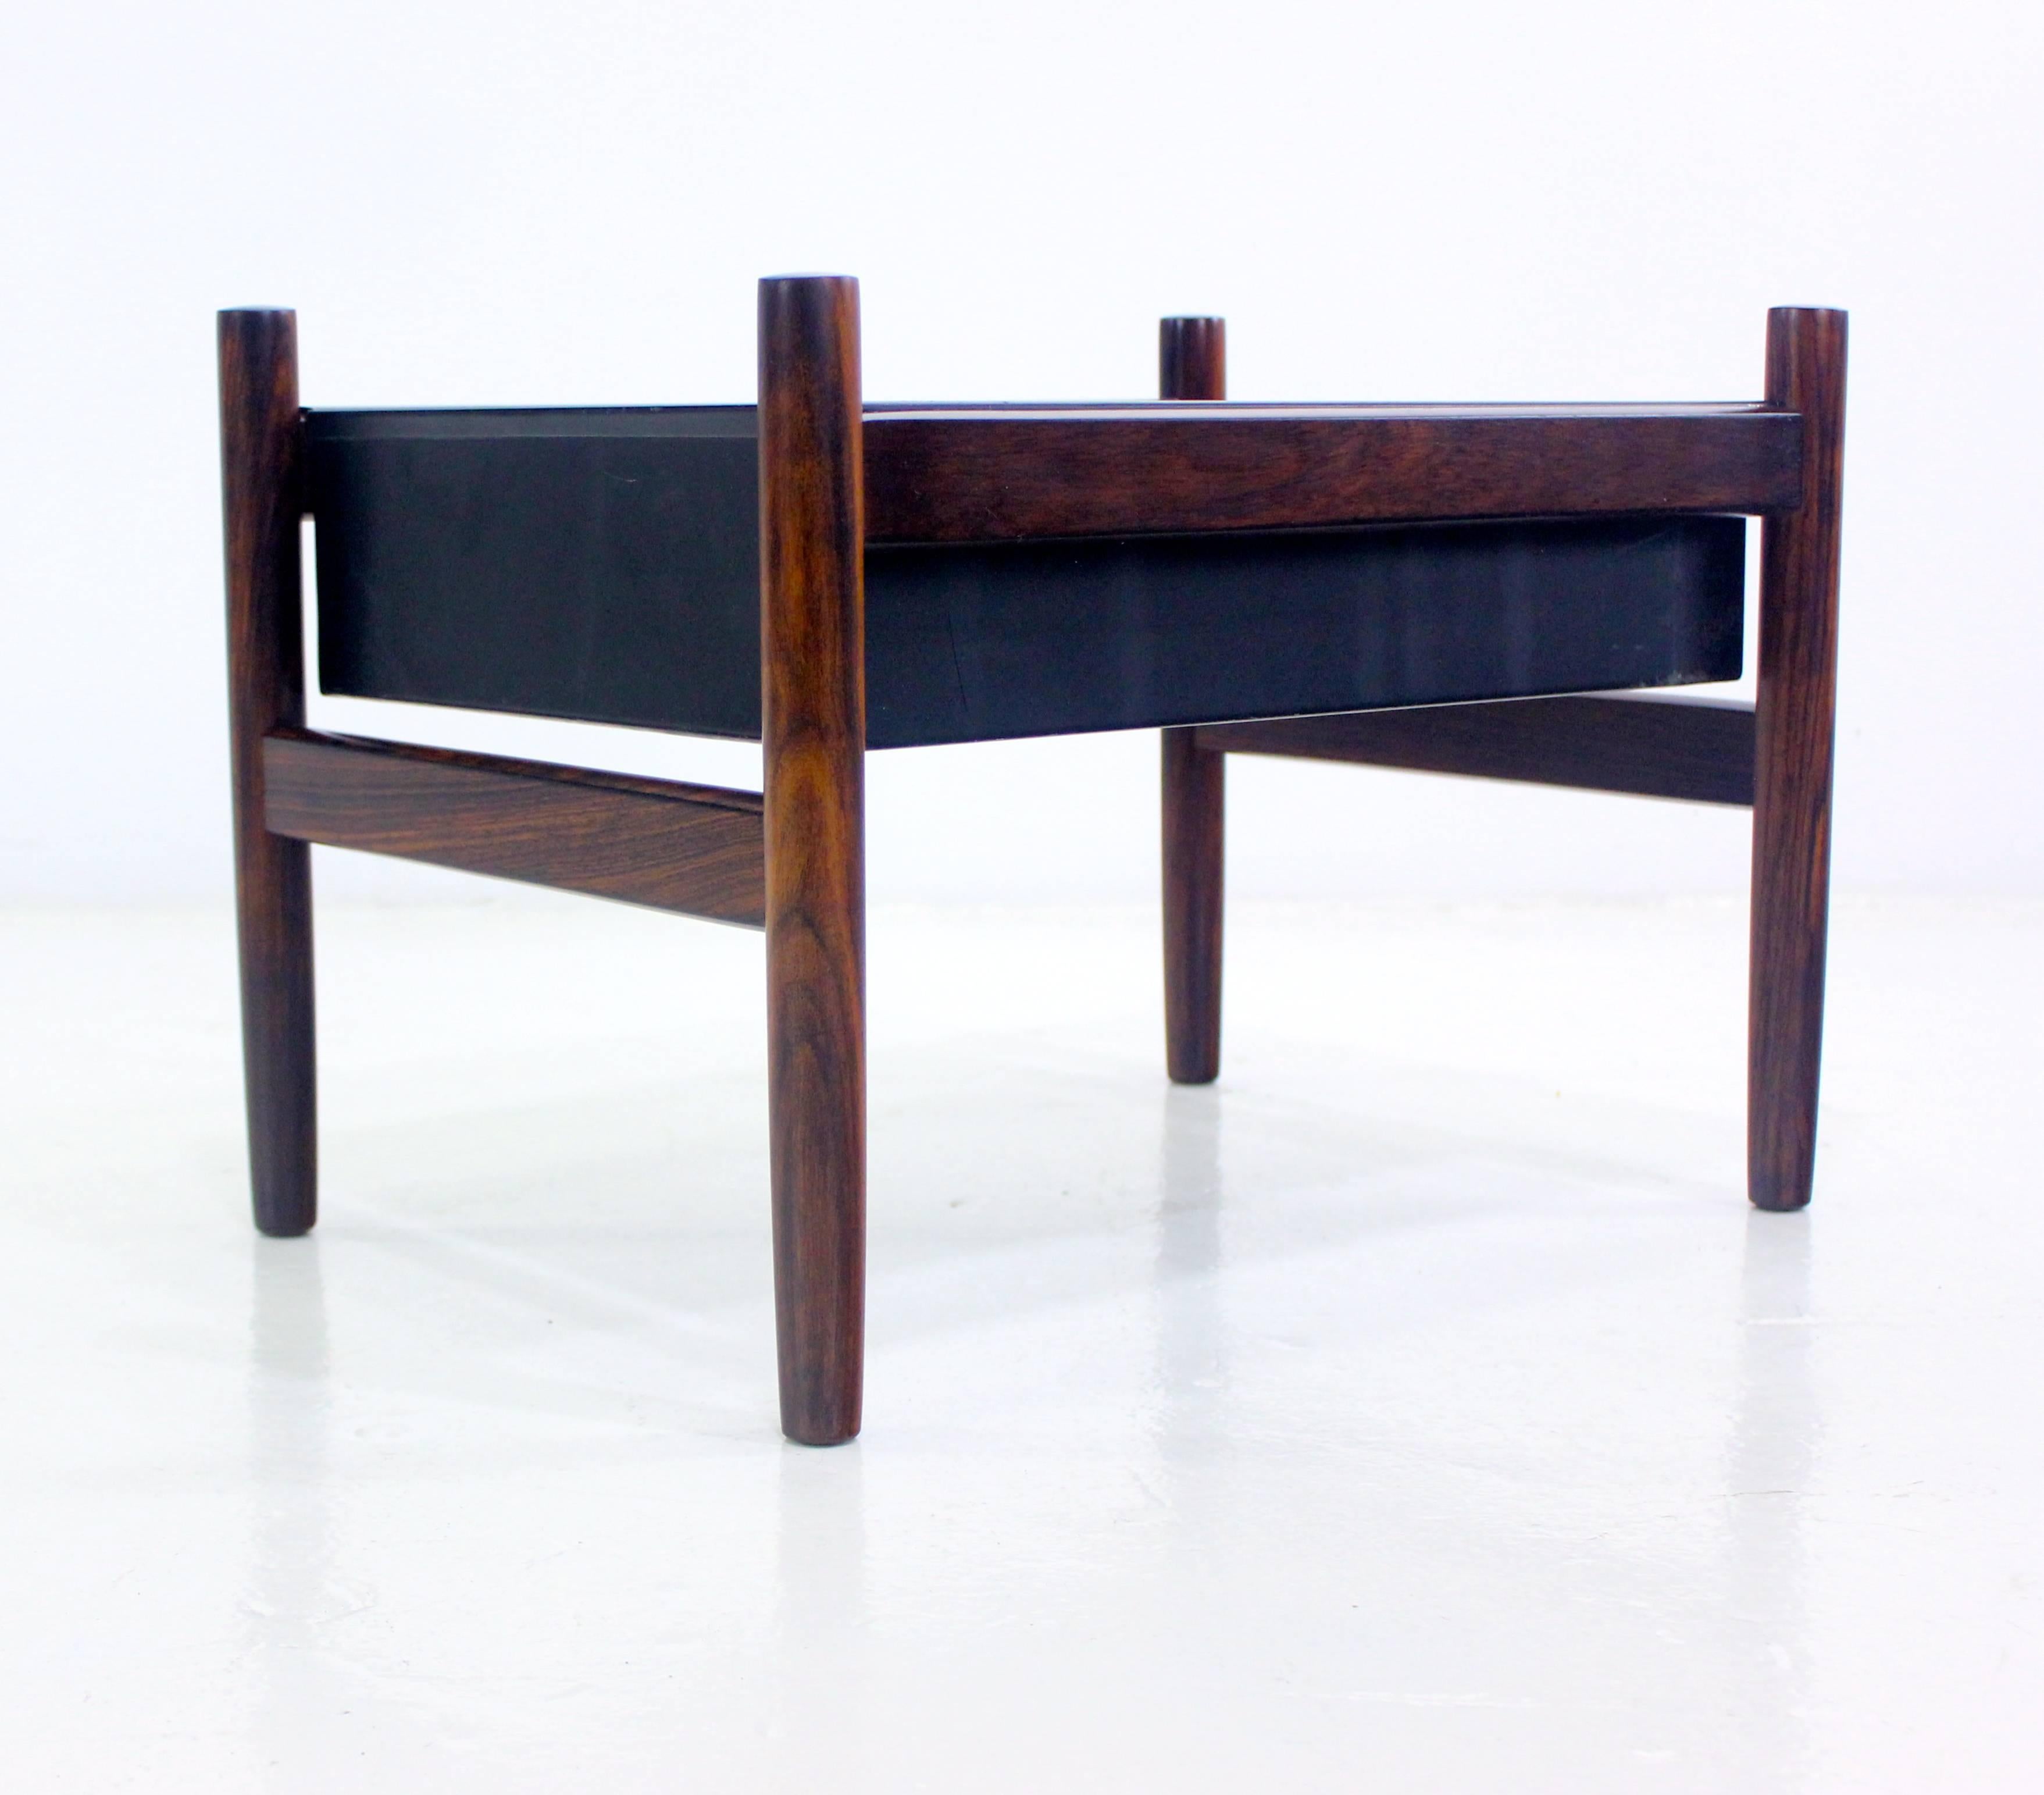 Two Danish modern planters.
Classic Minimalist rosewood frames with black metal insert.
Professionally restored and refinished by LookModern.
Matchless quality and price.
Low freight, quick ship.

 